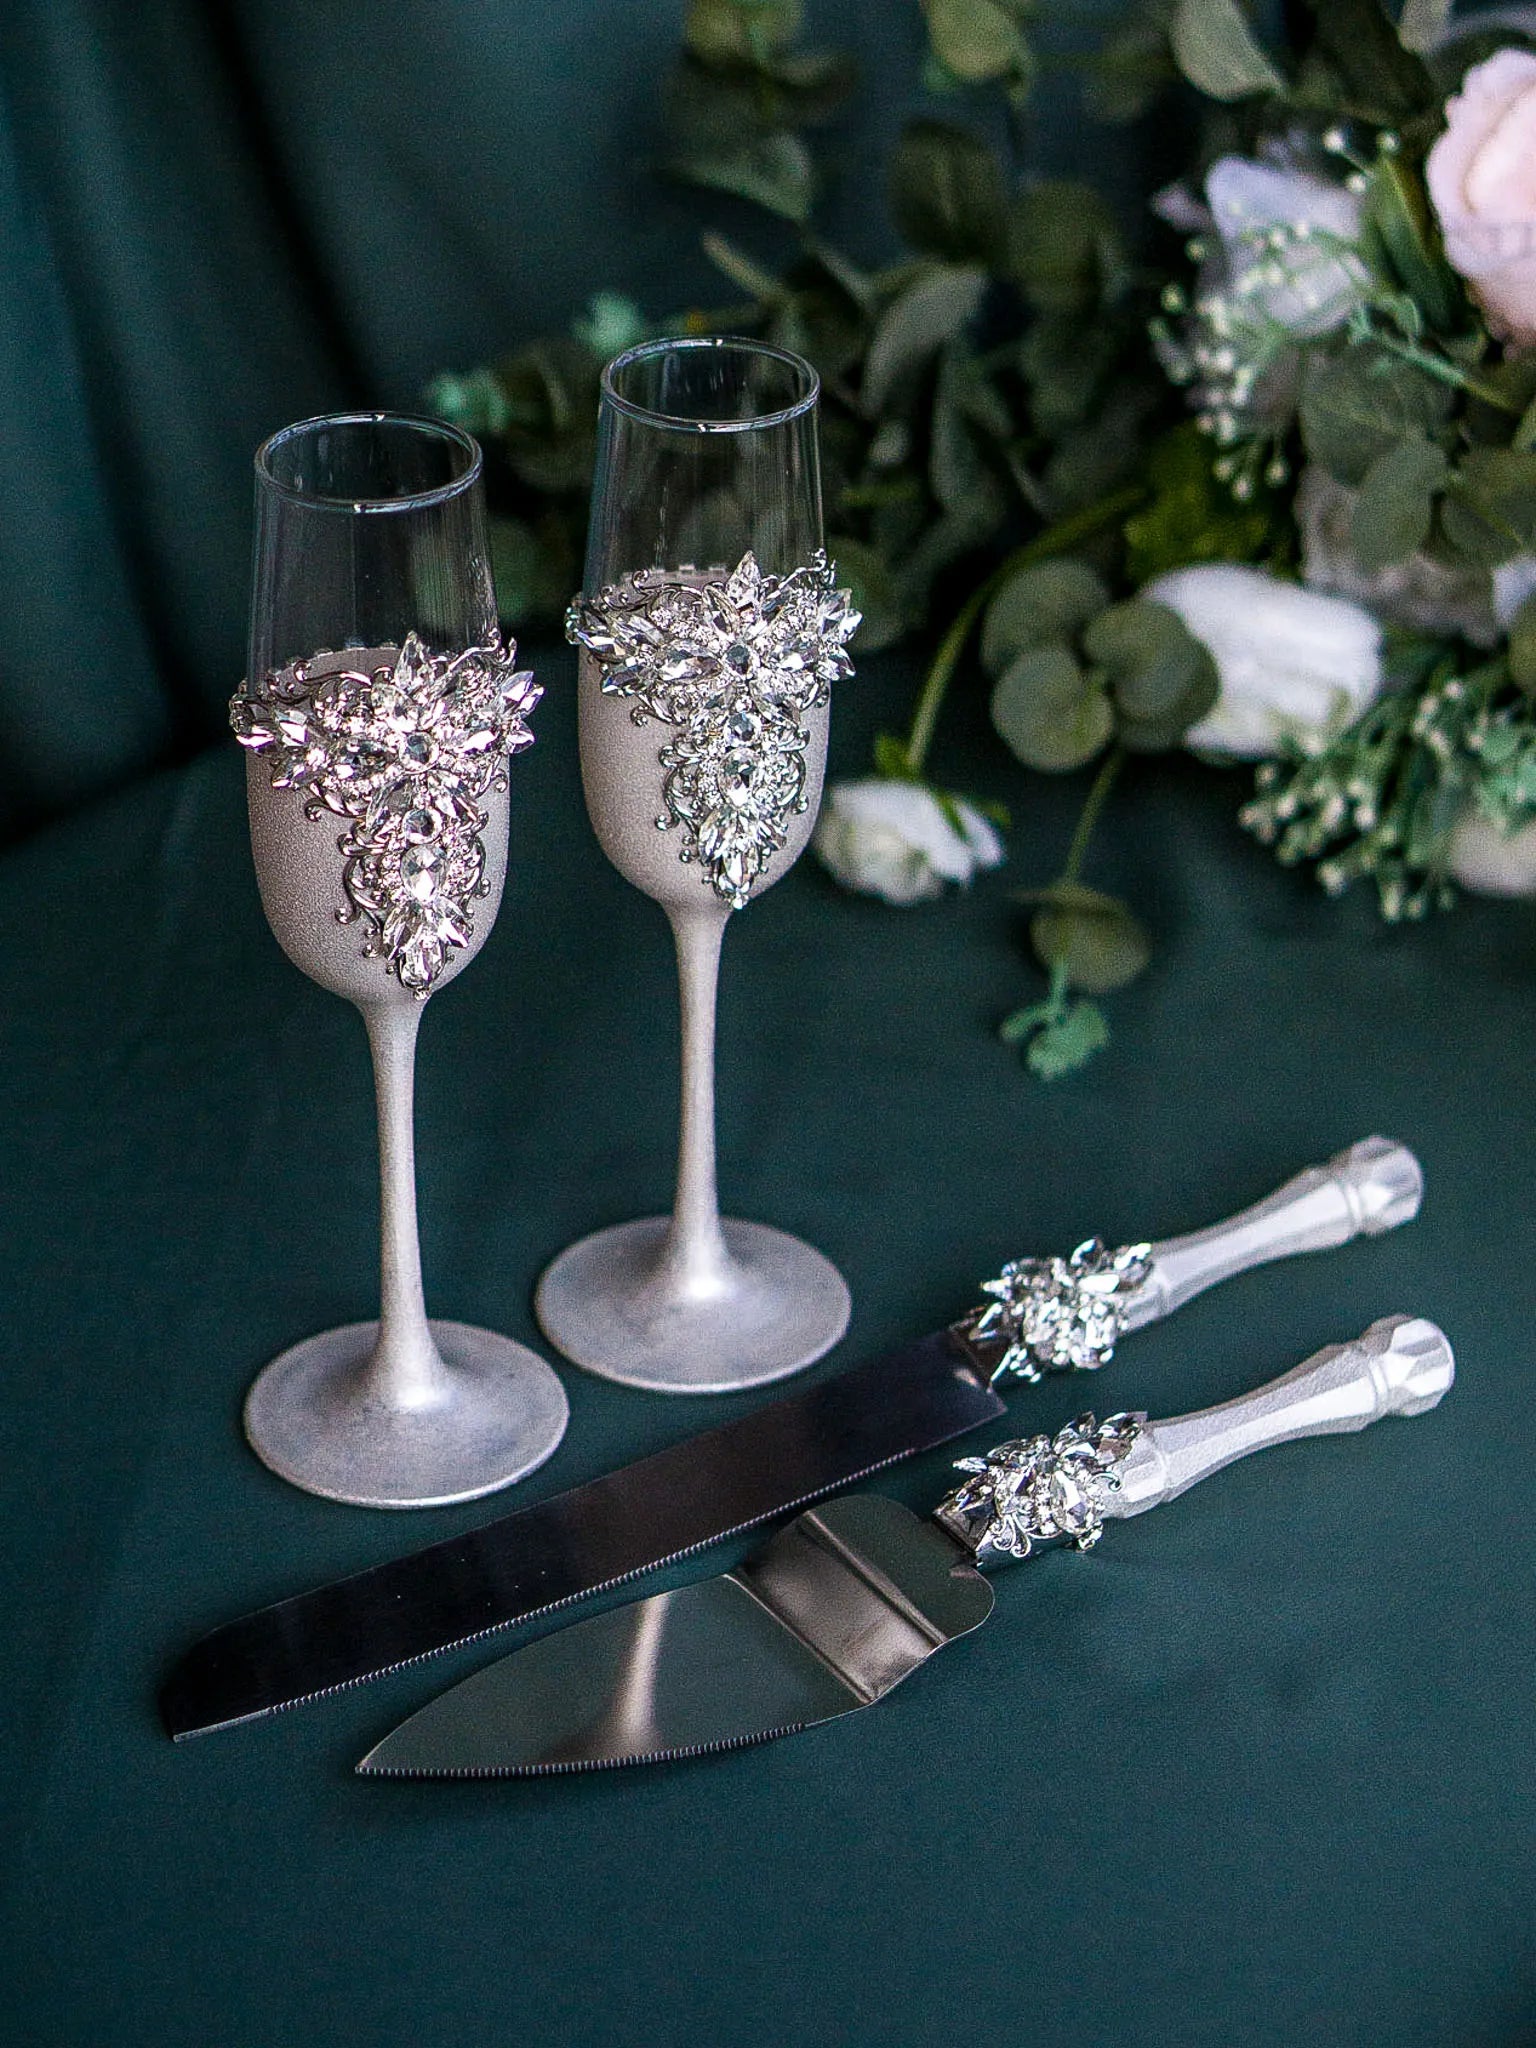 Personalized crystal cake cutter and server